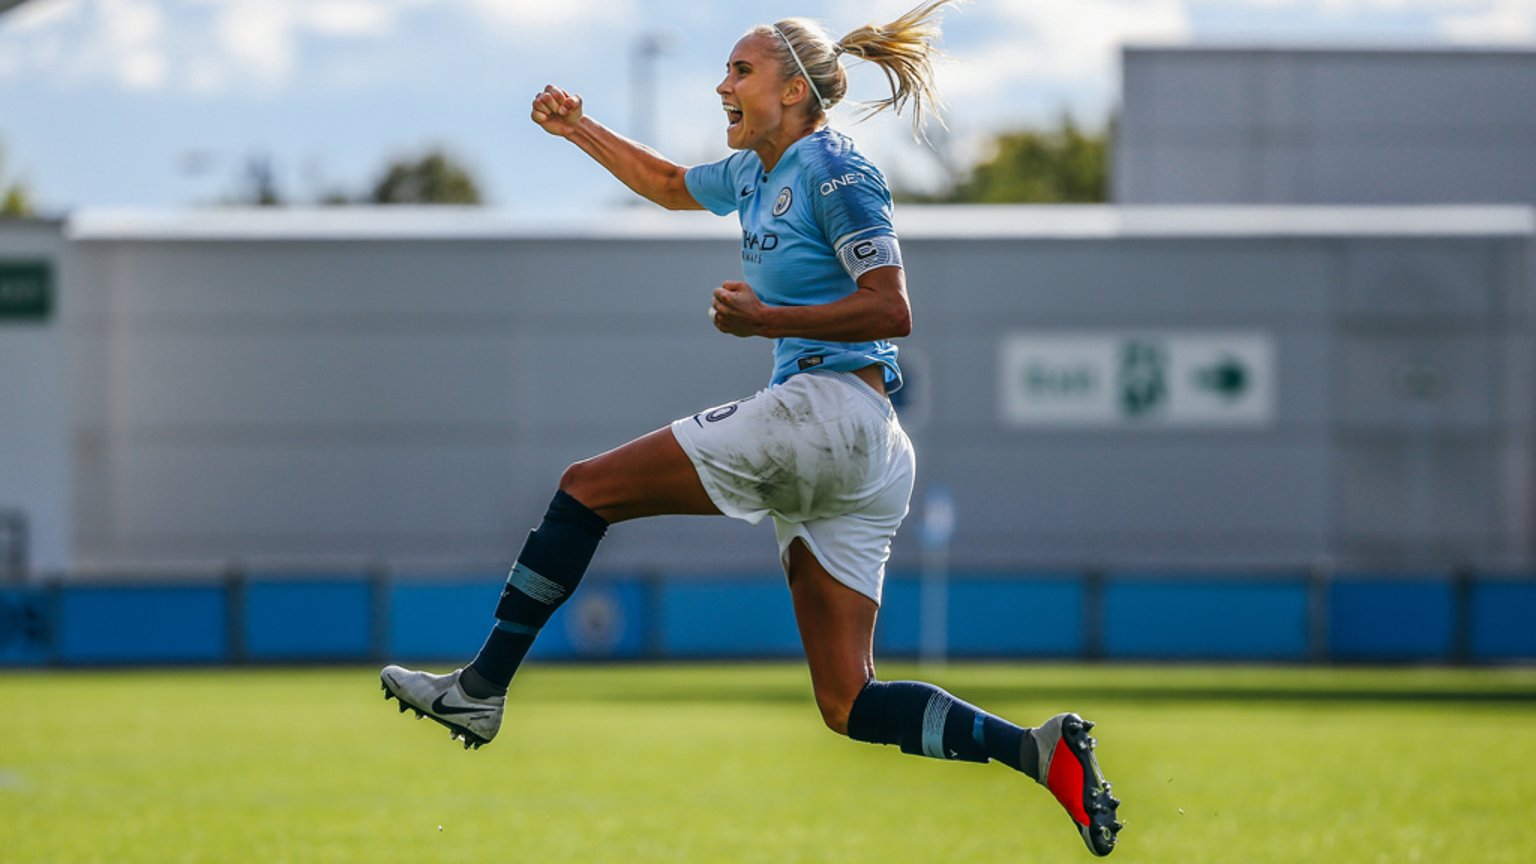 COMETH THE CAPTAIN: Steph Houghton netted an absolute worldie to level late on against Bristol City